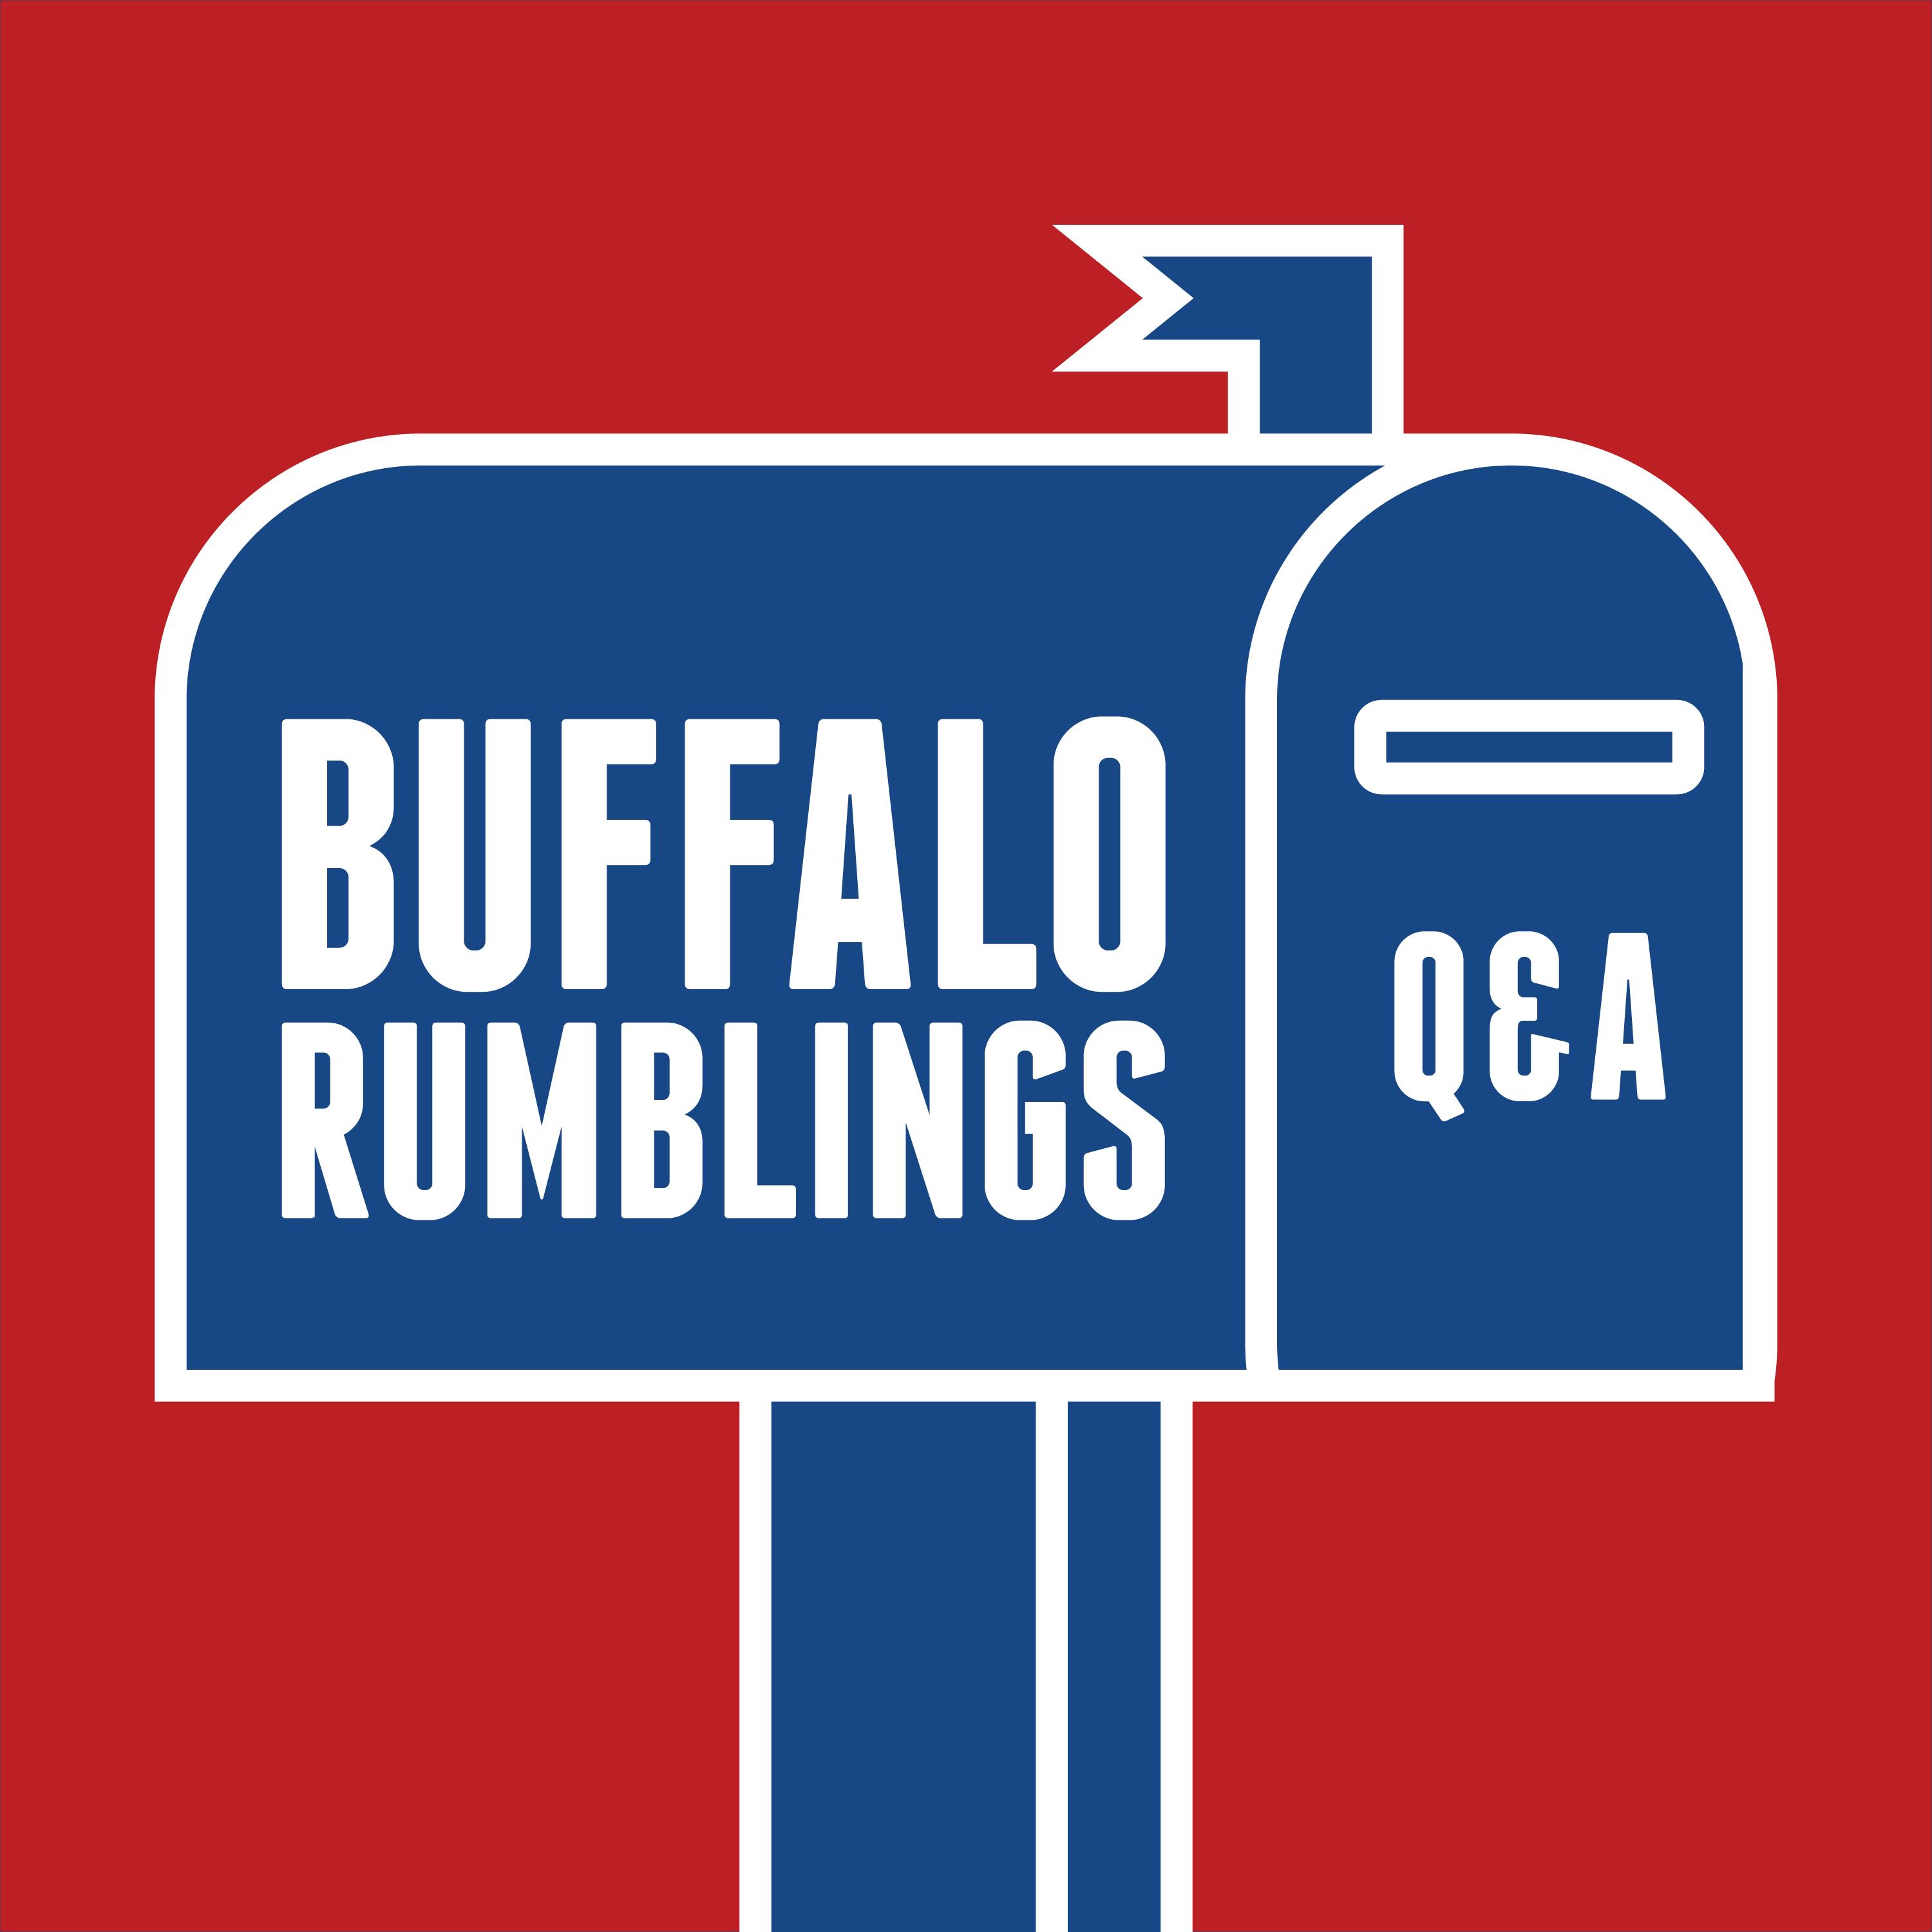 Q&A: Bills' offense inconsistency, run defense problems, running back torch-passing, and more